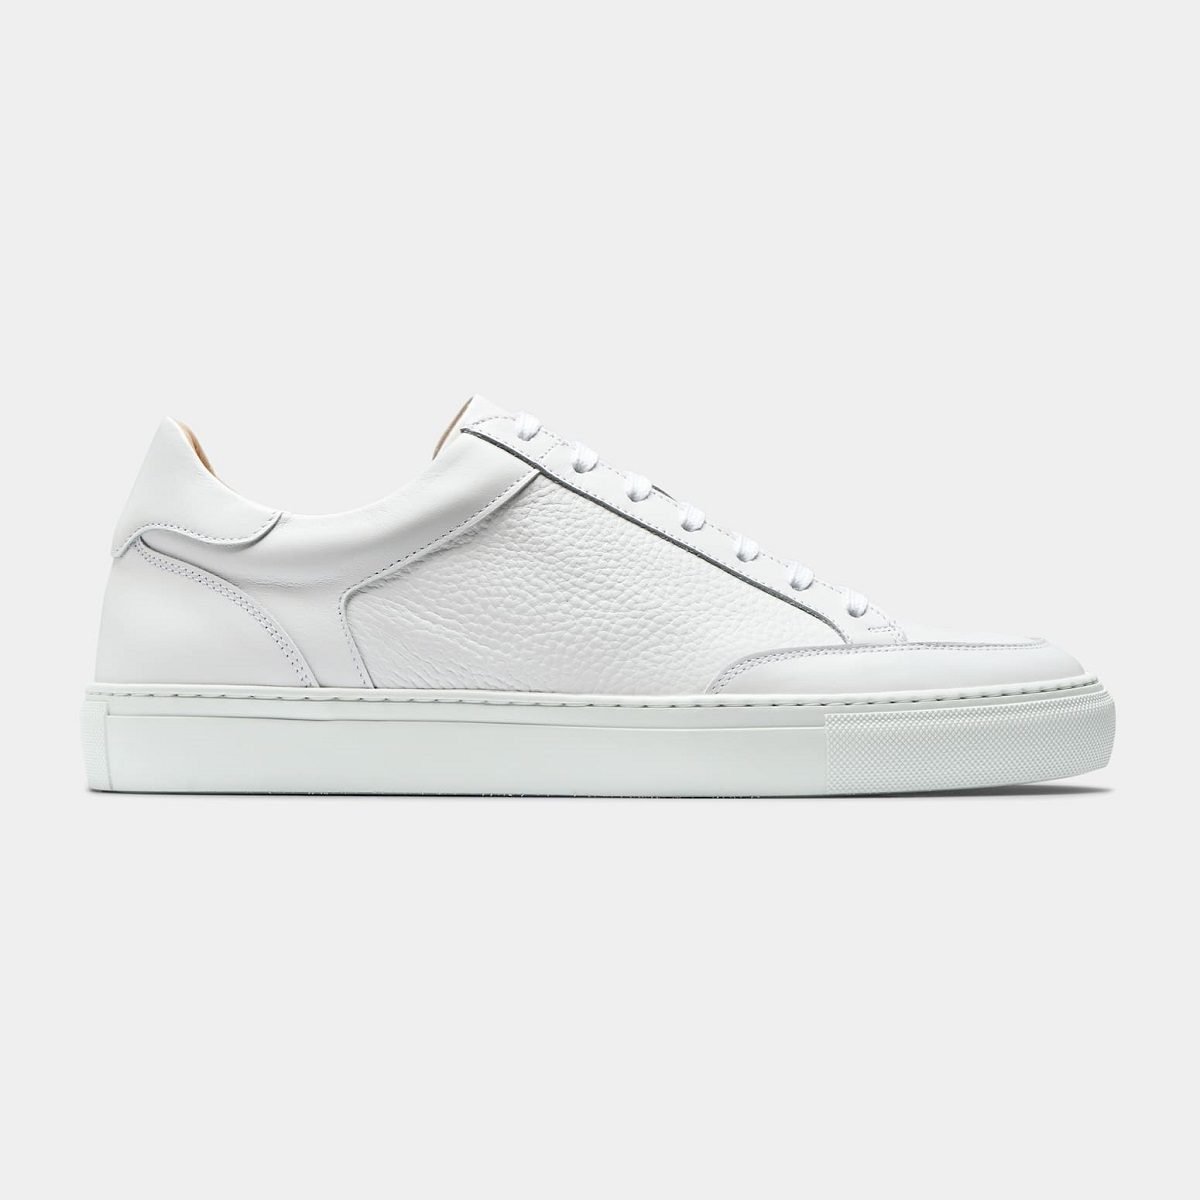 The 20 Best White Sneakers For Men [2022 Guide]